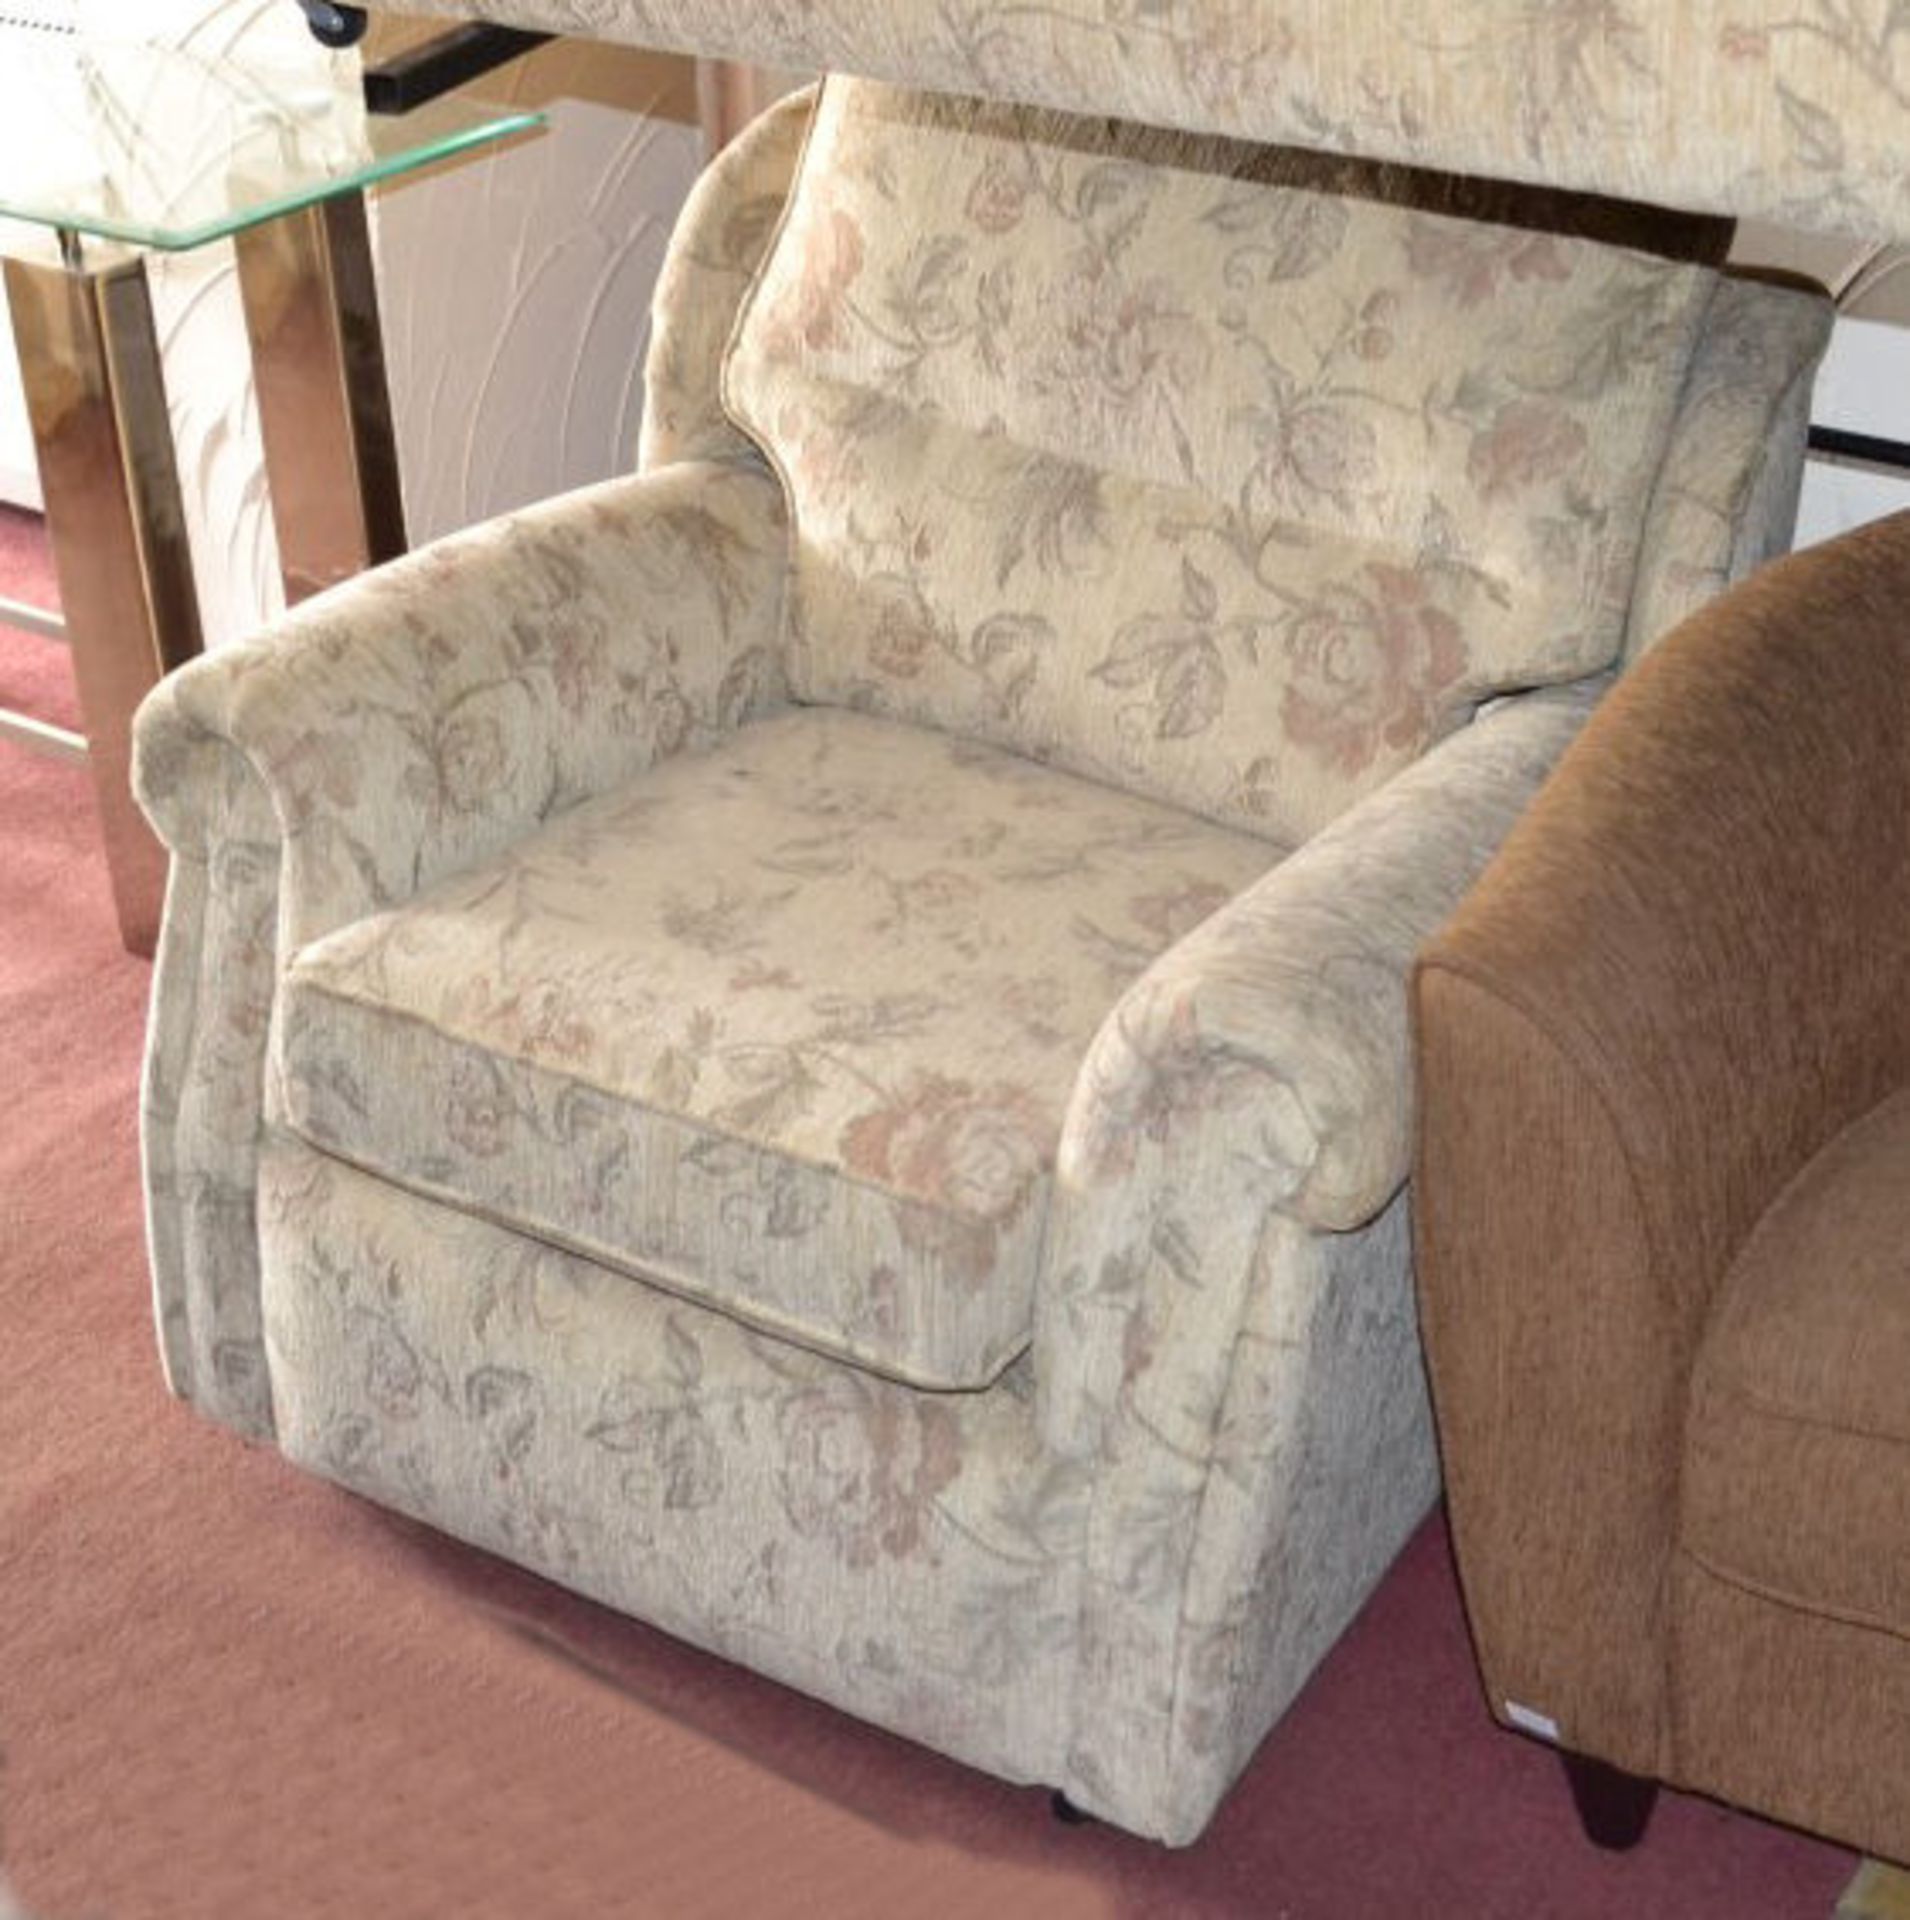 3 Seater Floral Pattern Fabric Sofa And Armchair Set In Cream. - Image 5 of 6